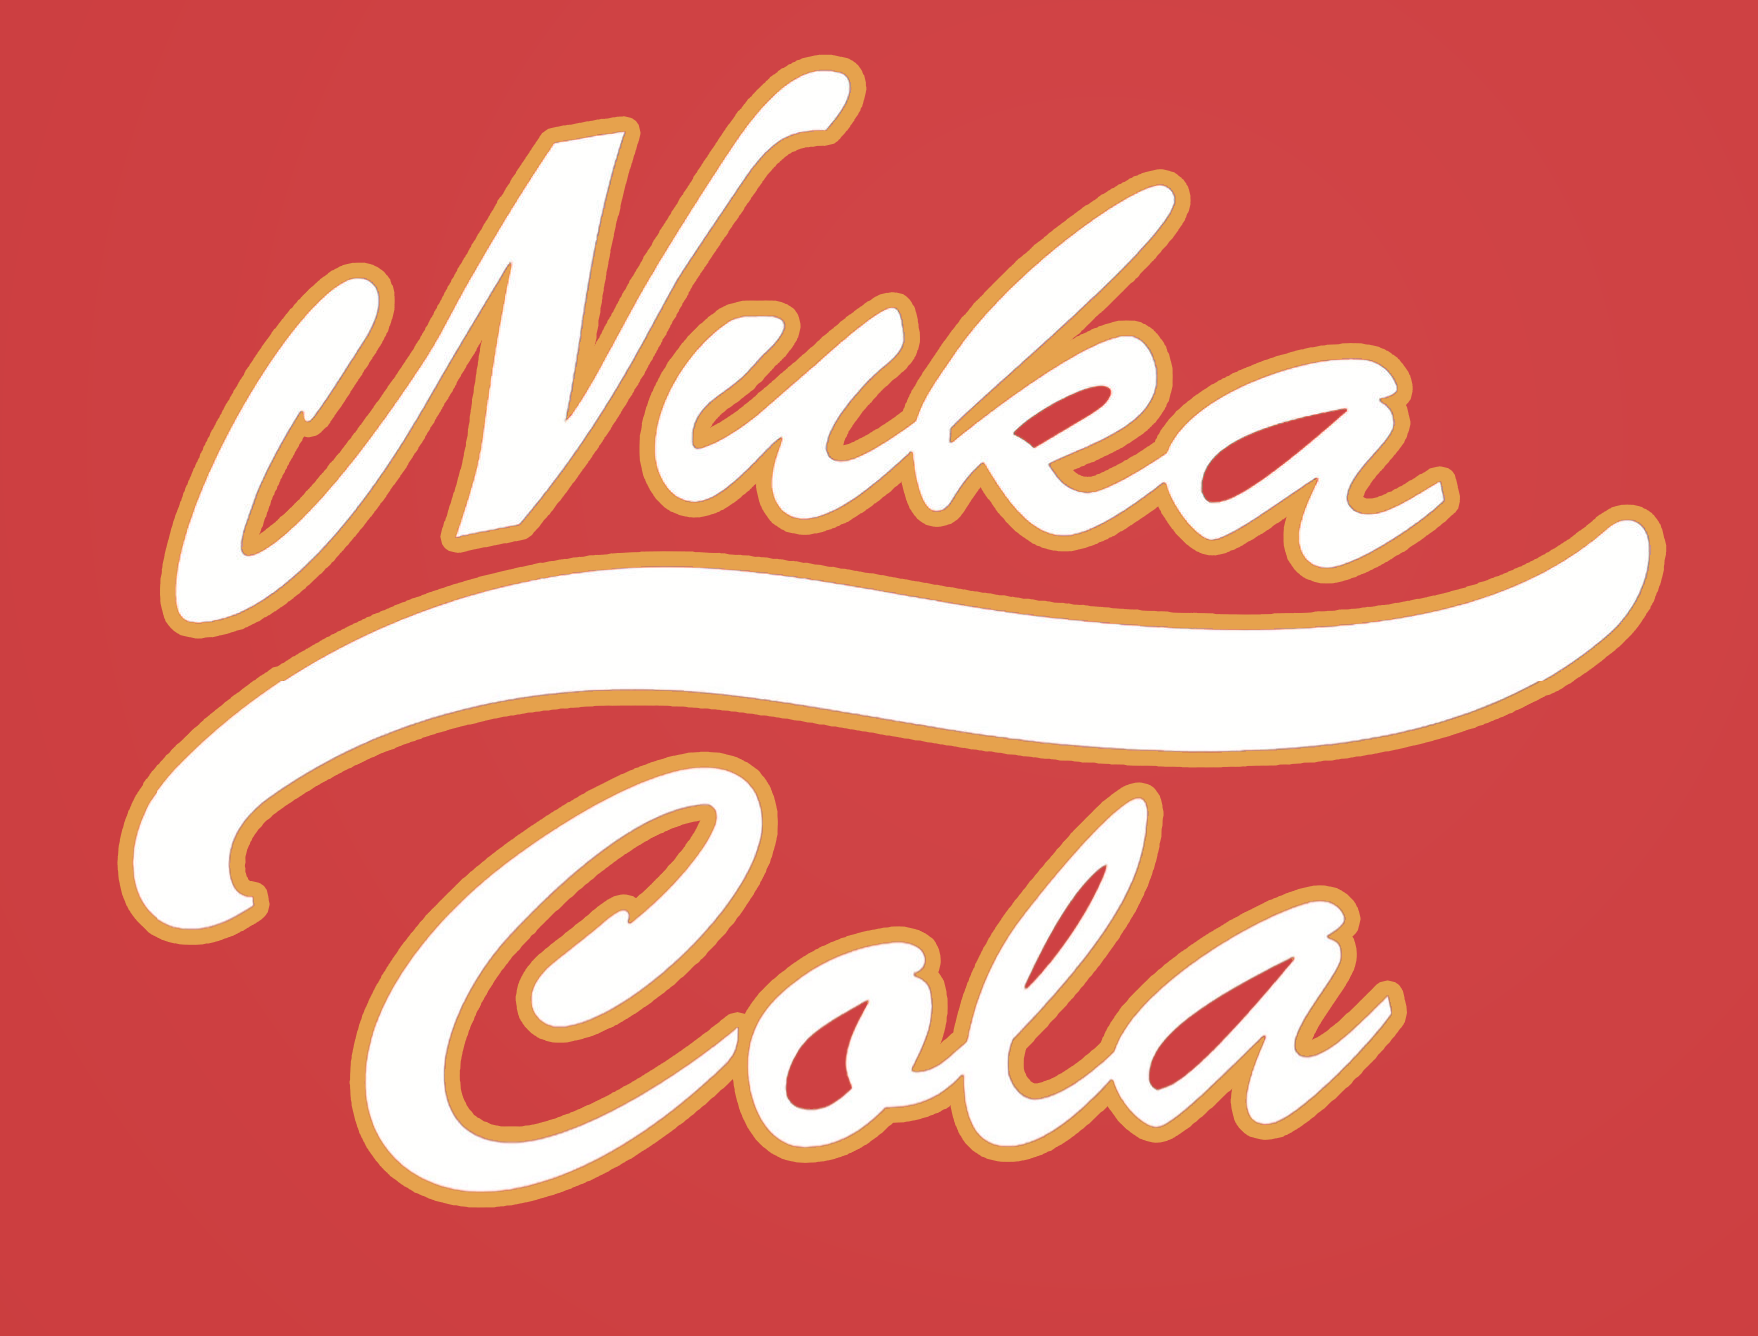 https://static.wikia.nocookie.net/fallout/images/5/52/Nuka-Cola_Corporation.png/revision/latest?cb=20190921062207